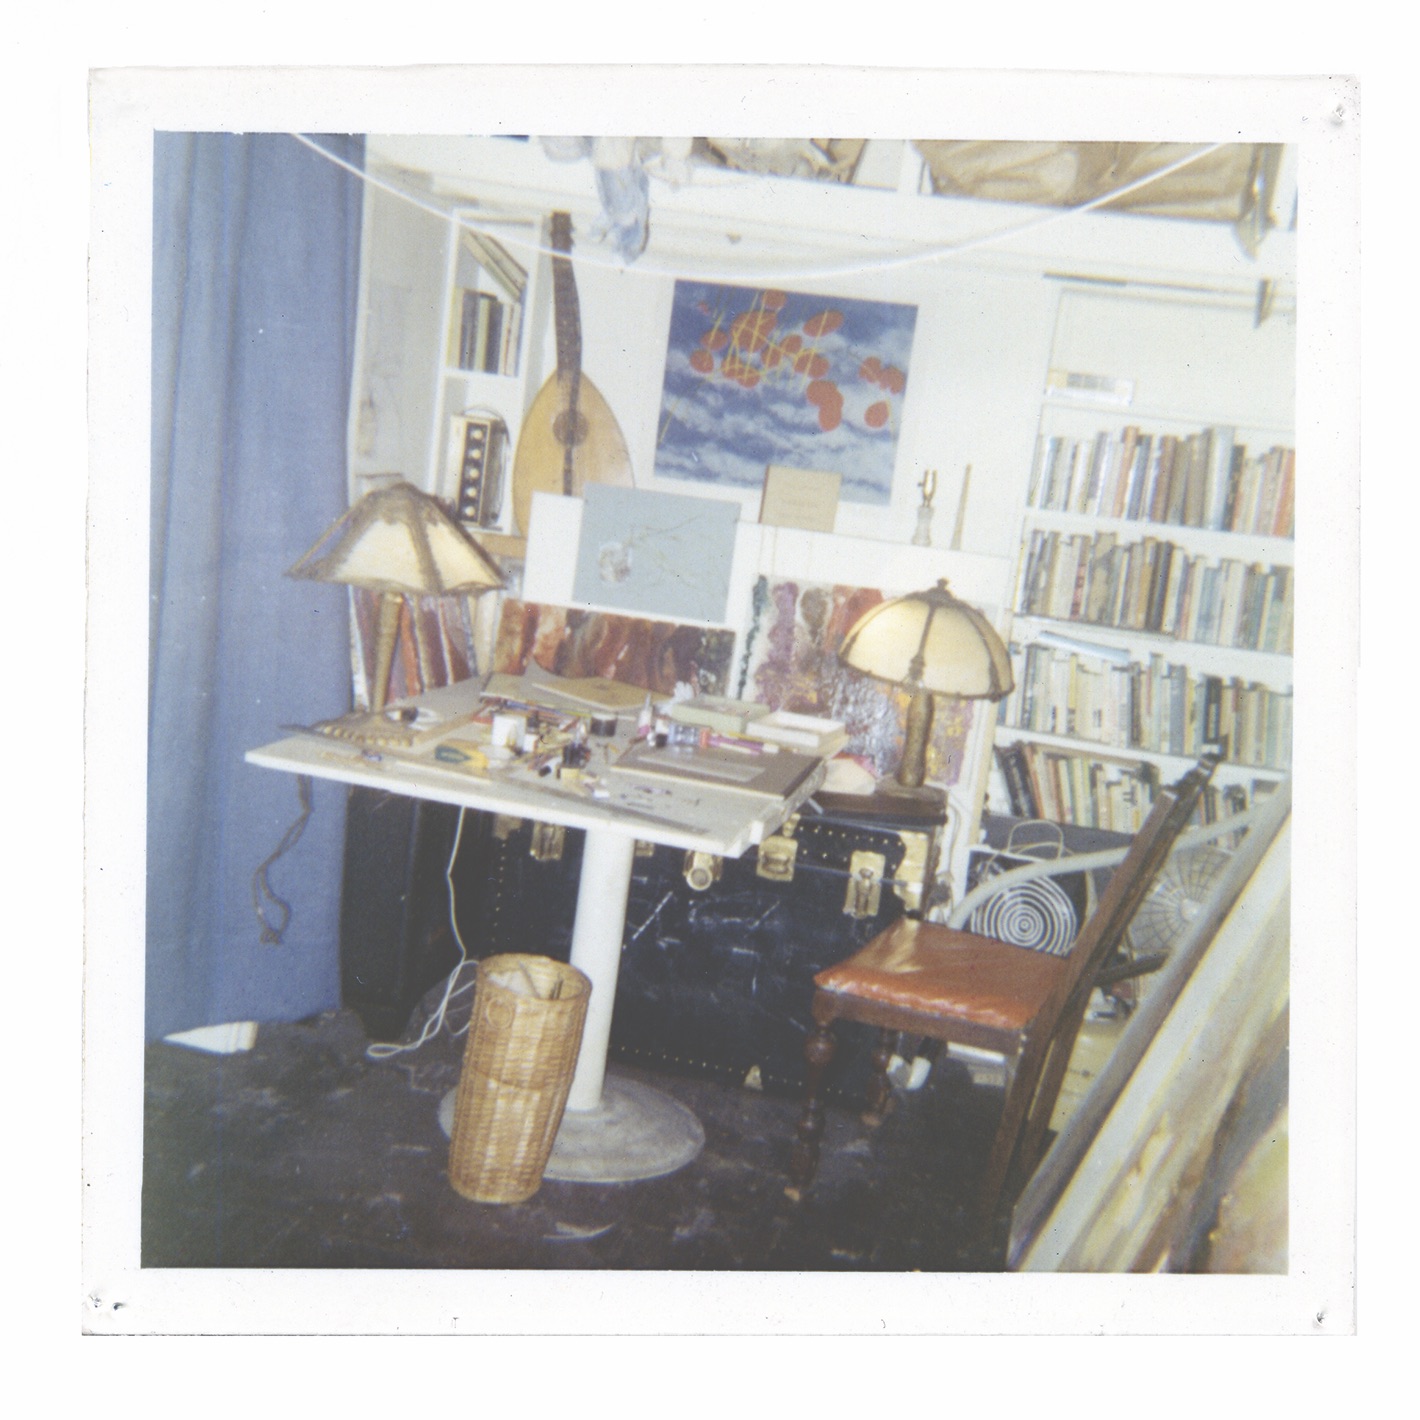 A photograph of a workspace, depicting a cluttered white table, a wood and leather chair, two cream-colored lamps, a bookshelf, a mandolin-like instrument and a blue curtain.